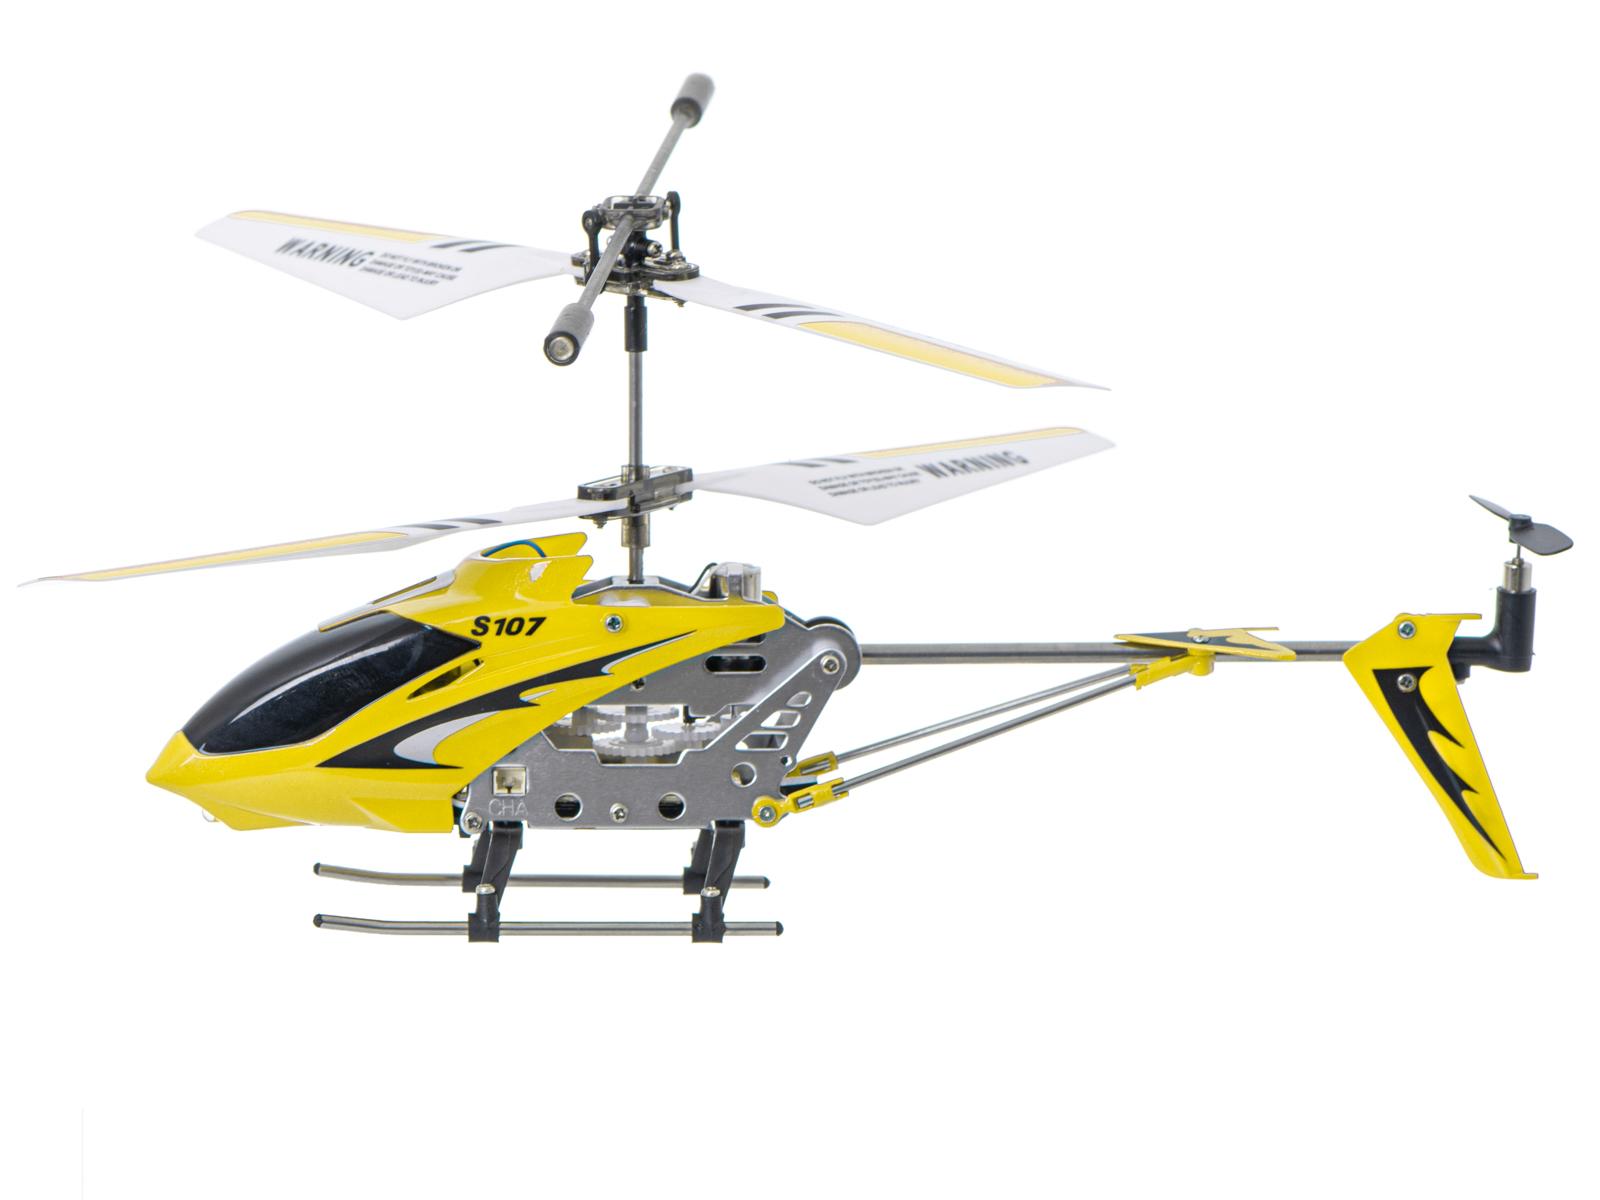 Easiest Remote Control Helicopter To Fly: Syma S107G: The Ideal RC Helicopter for Beginners